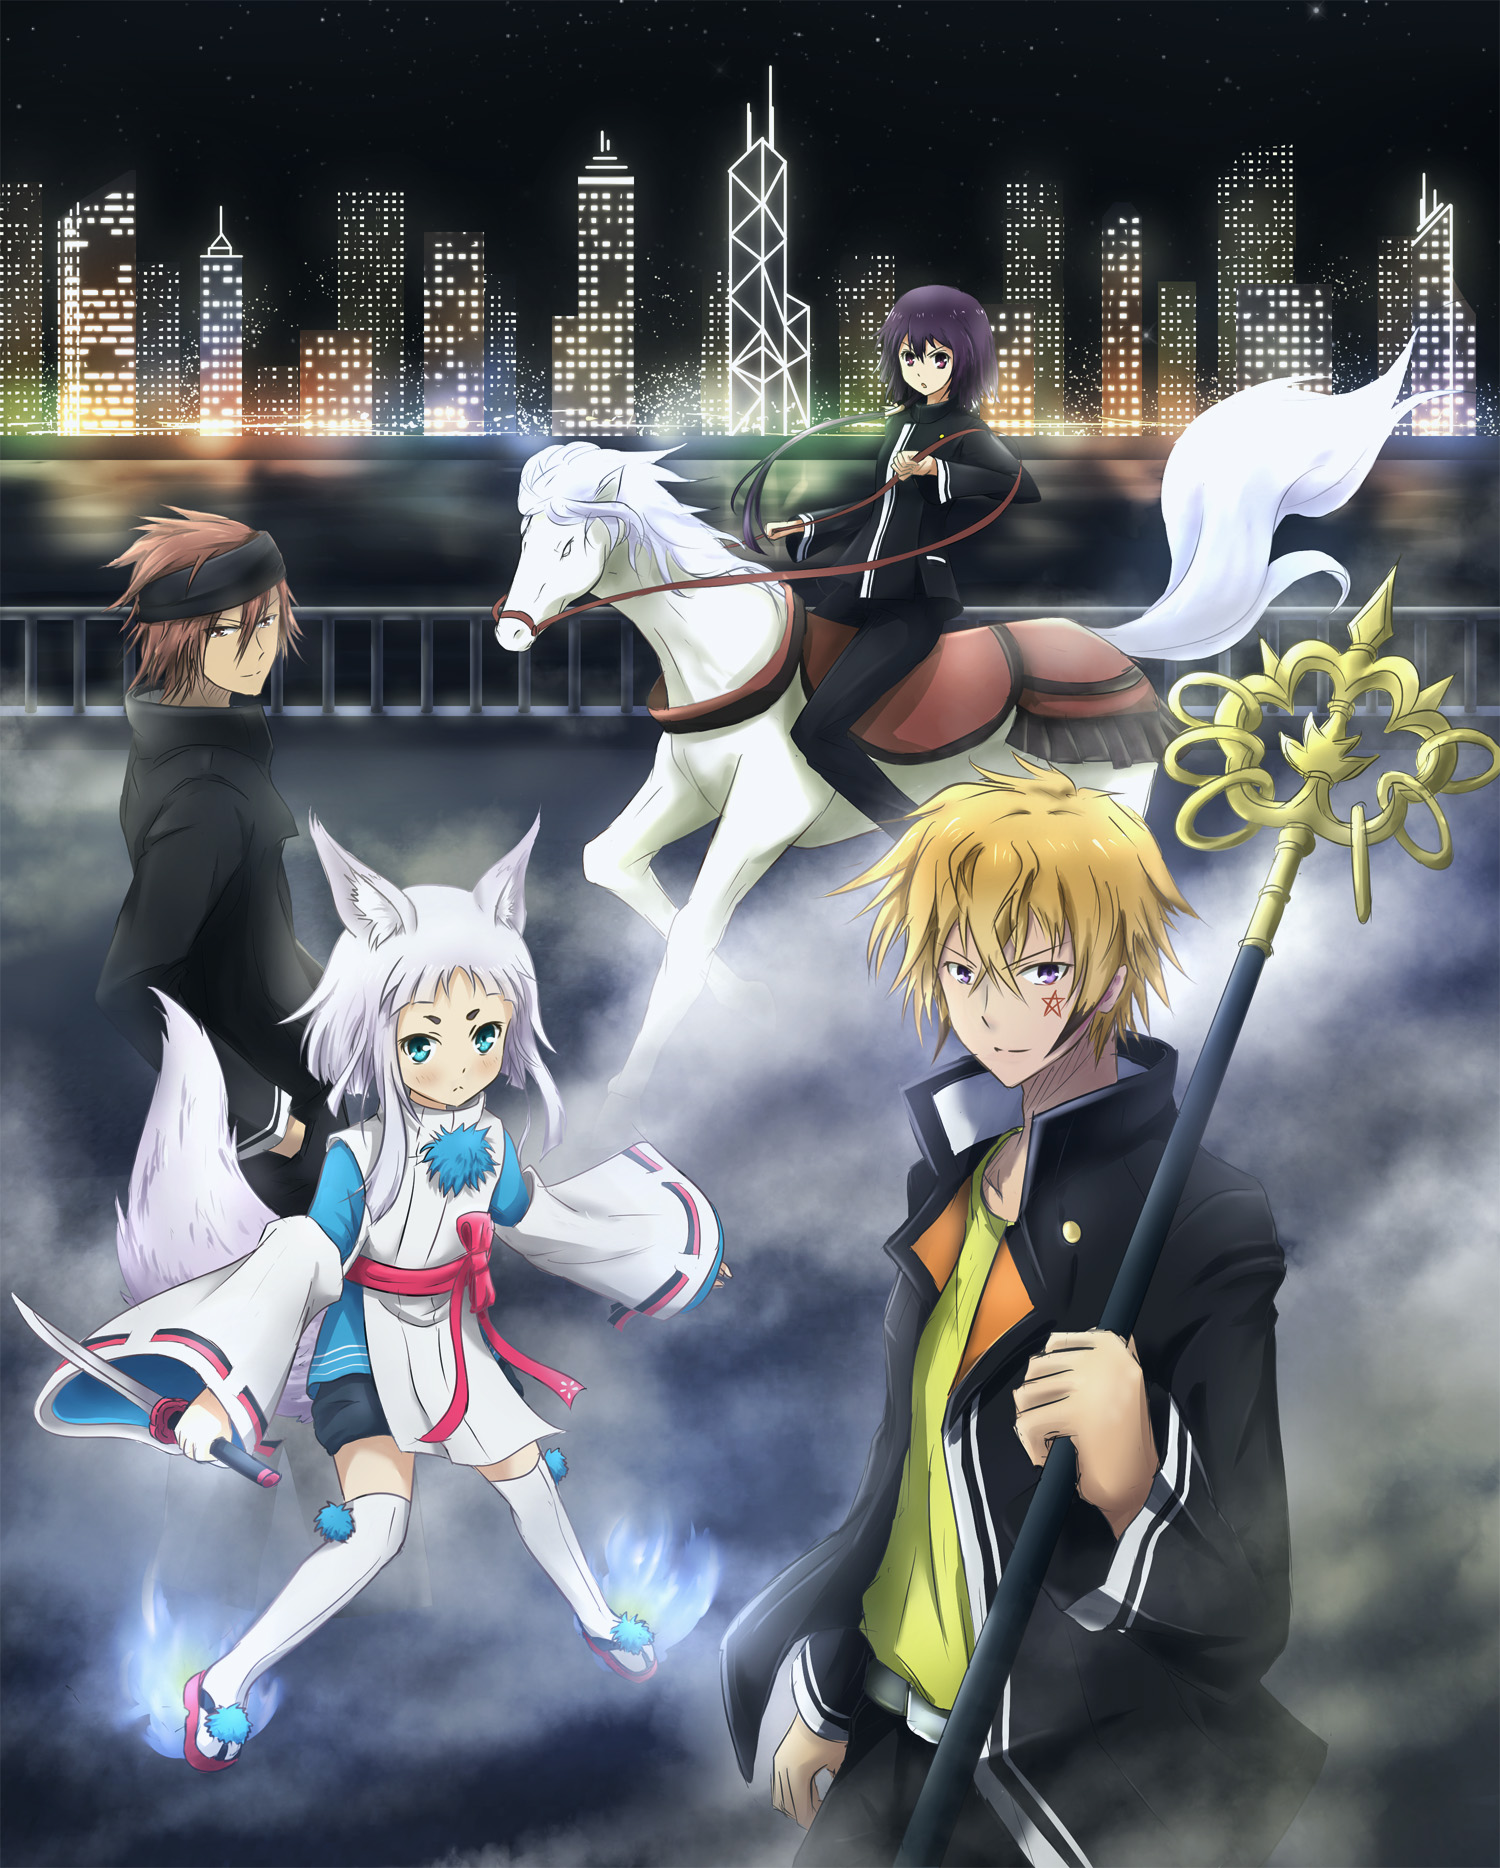 Render: Tokyo ravens - Tsuchimikado and co. by Panelletdelimon on